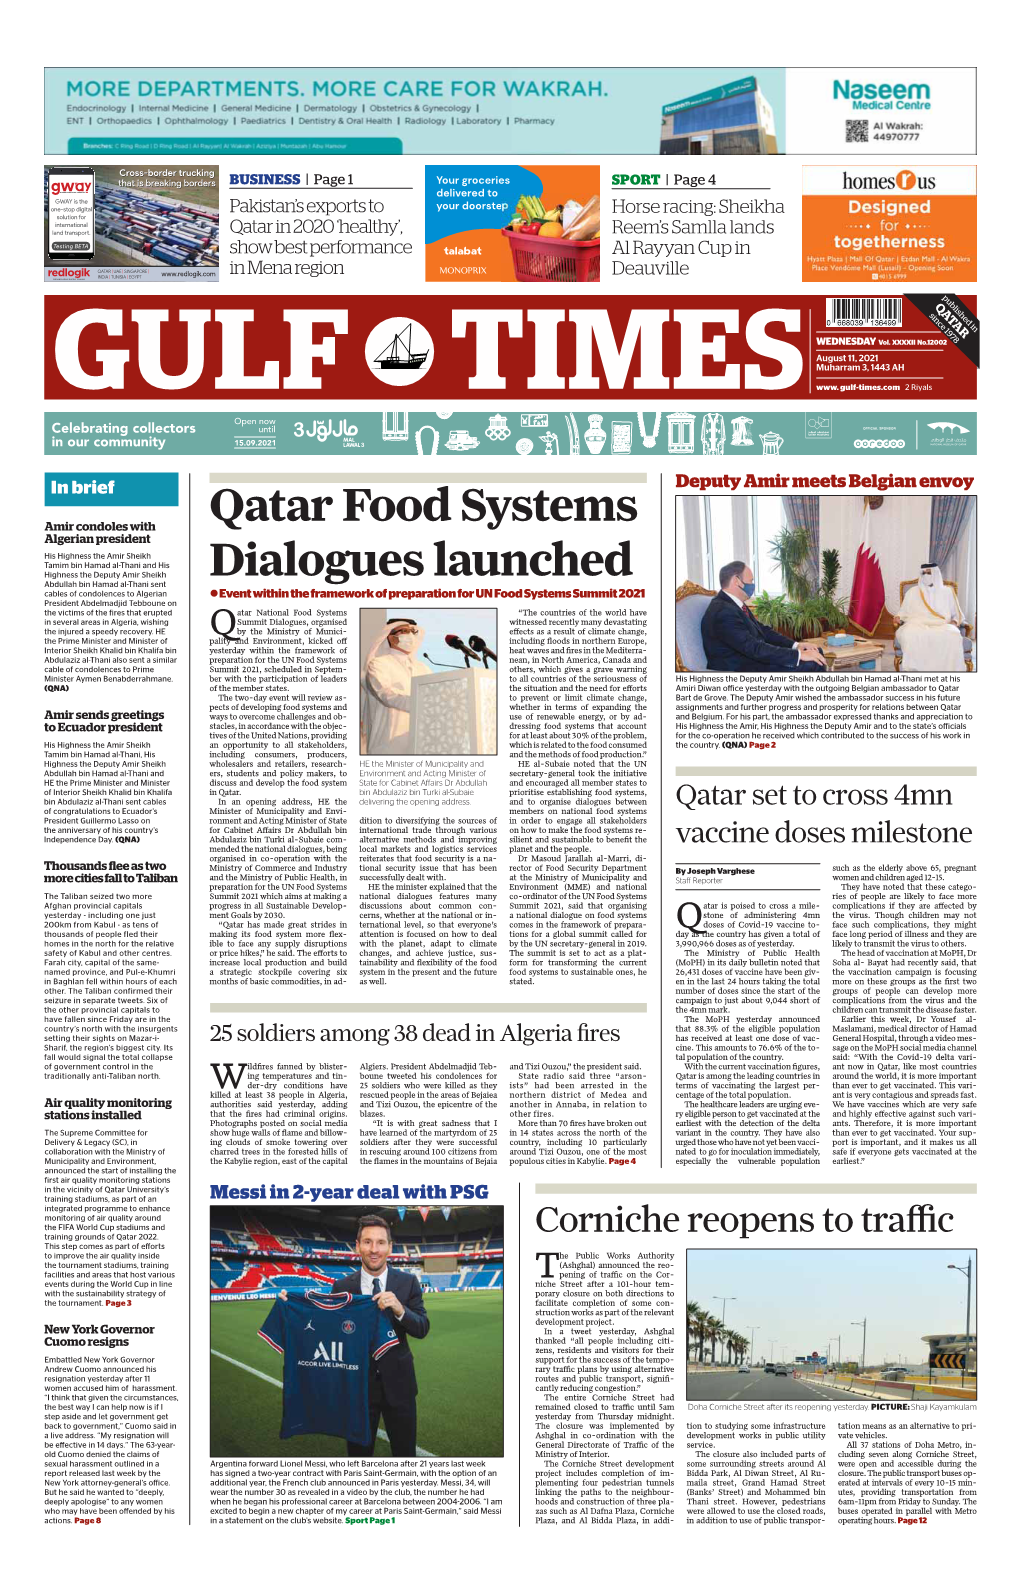 Qatar Food Systems Dialogues Launched